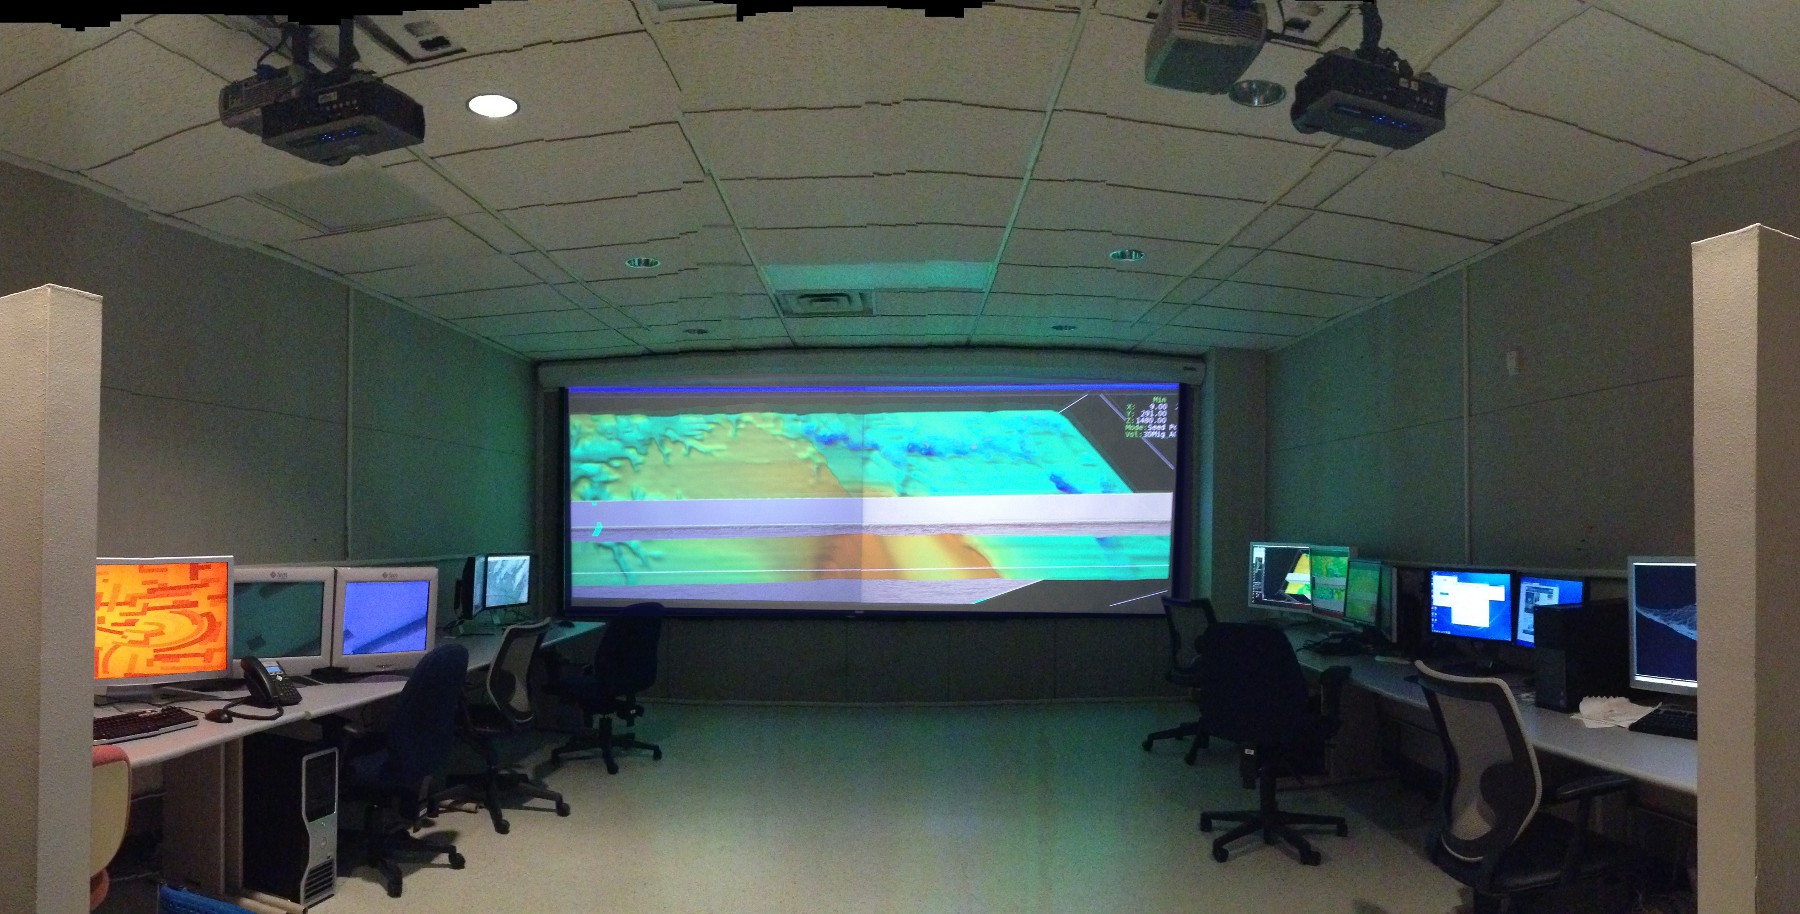 STARR Visualiztion Lab with four projectors on double wide screen and workstations.